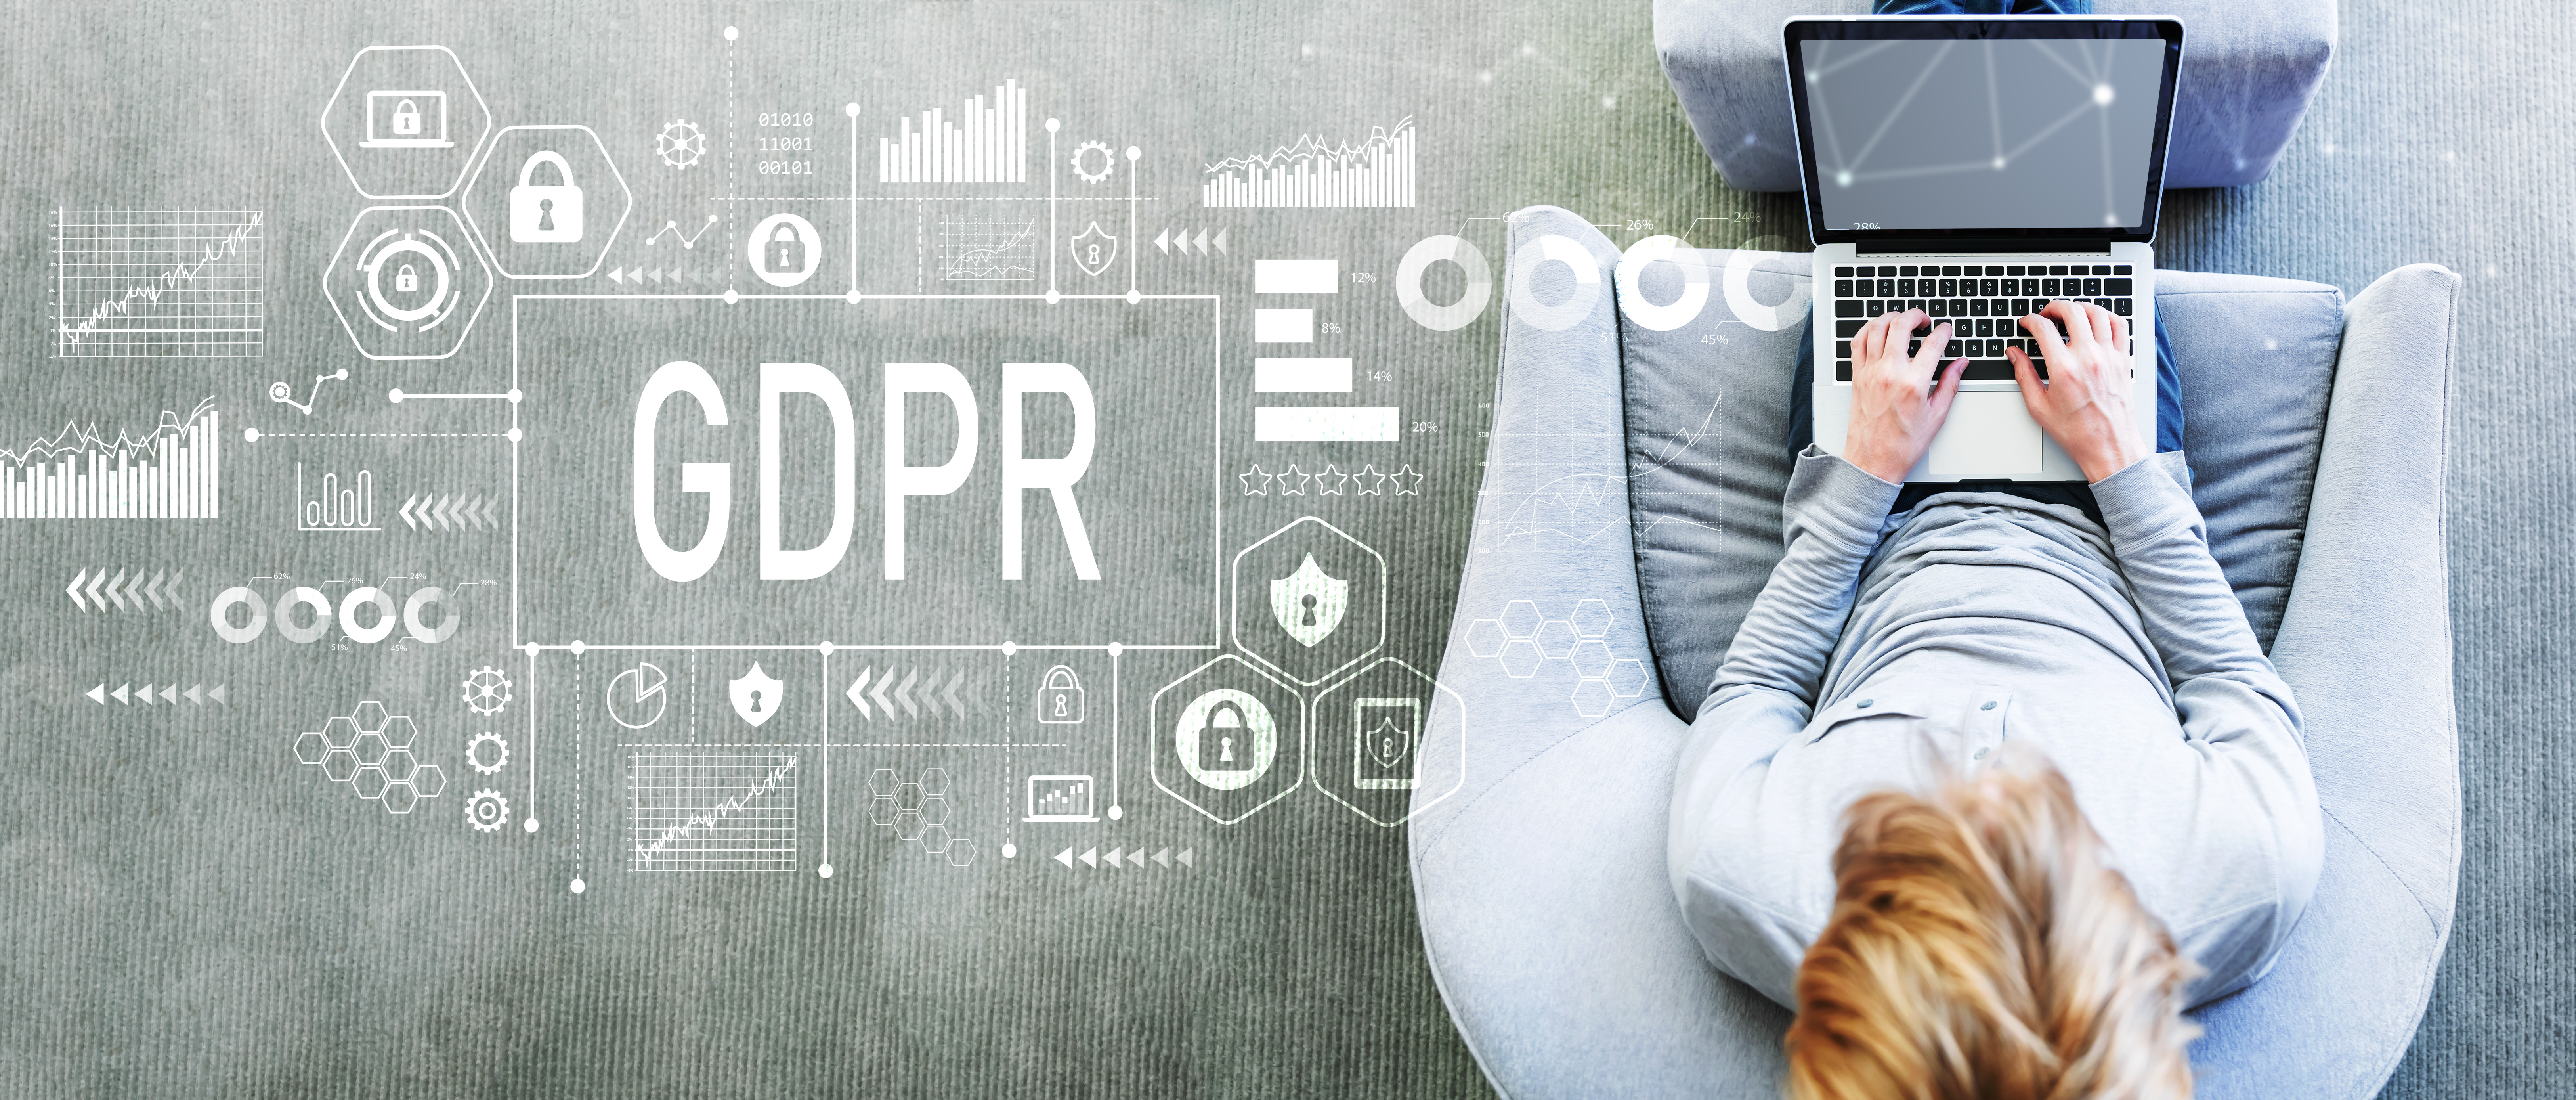 GDPR for start-up: what are the implications?